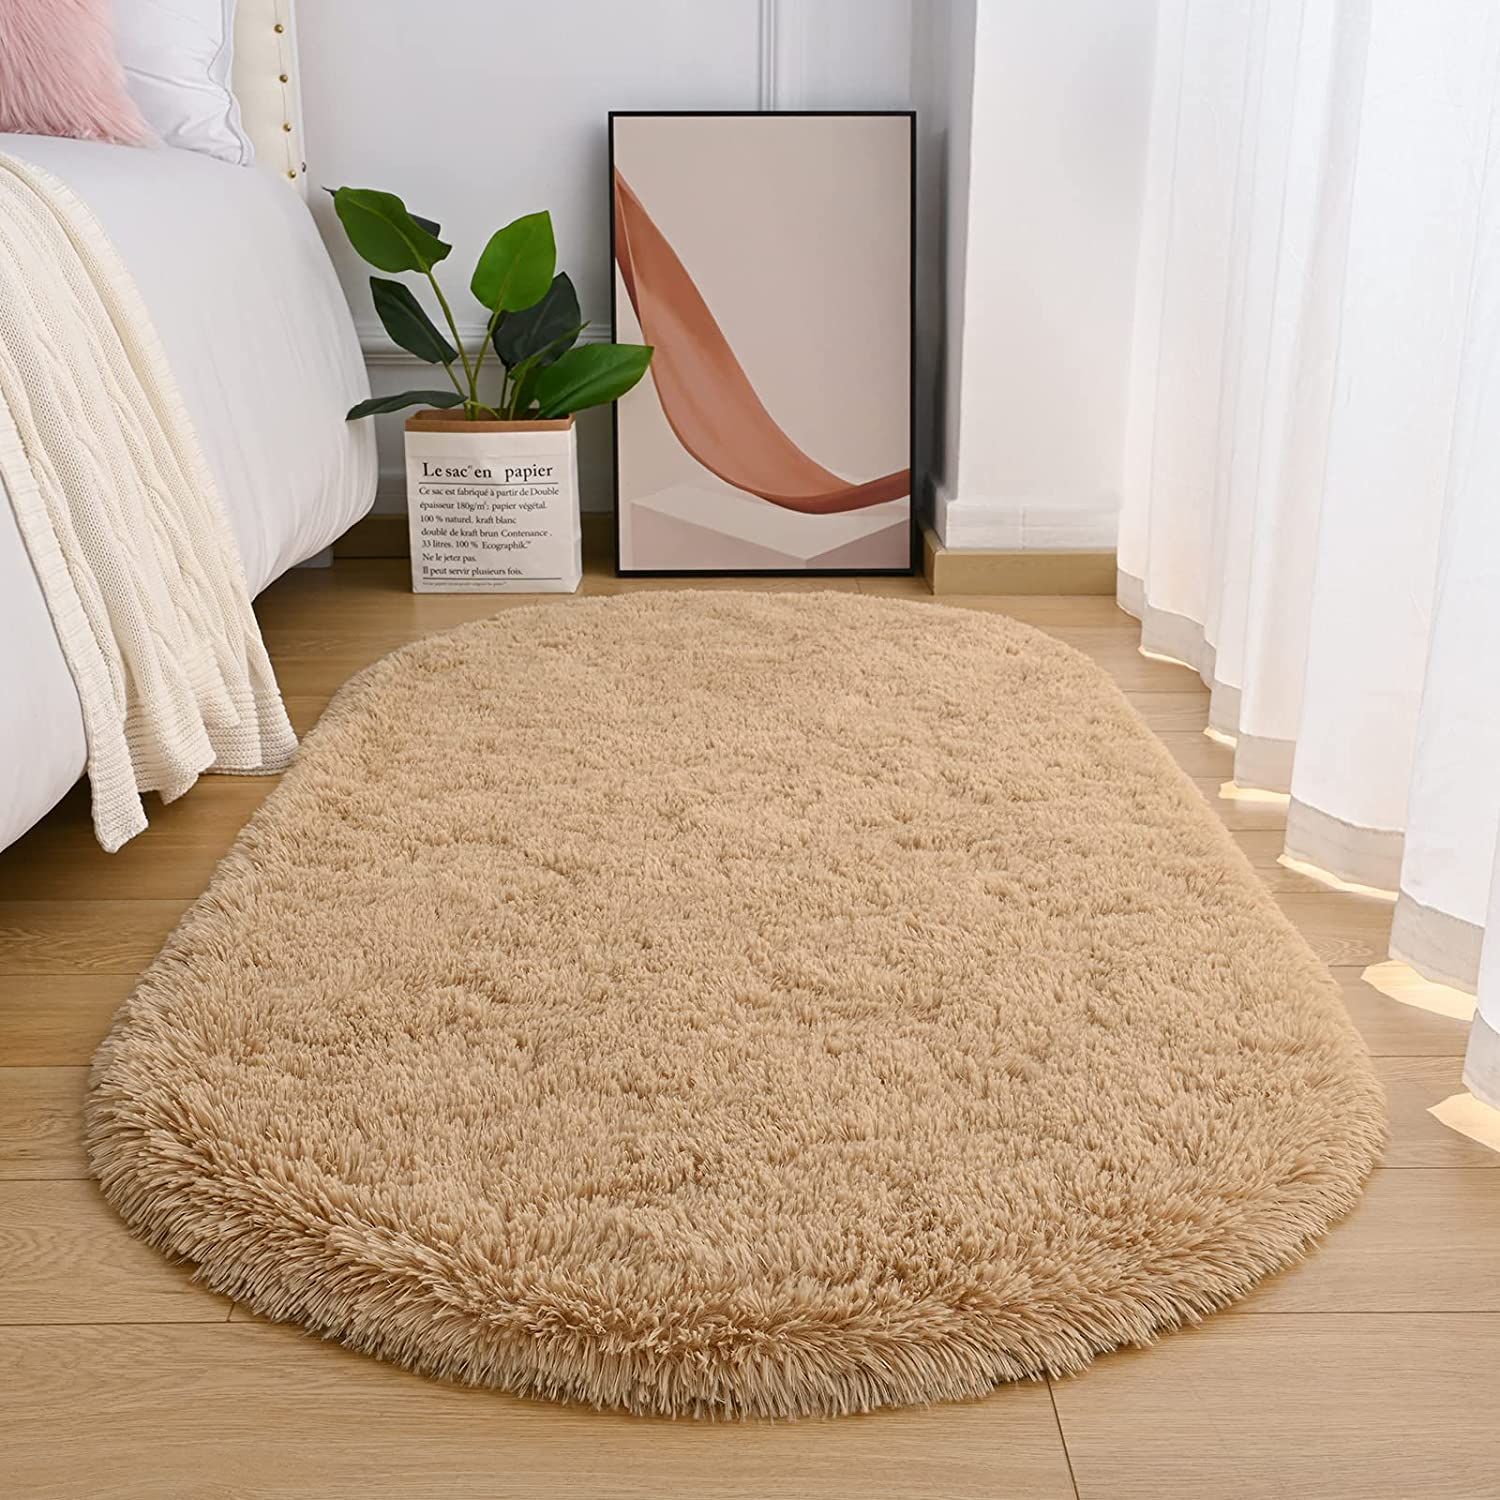 Goideal Oval Shaggy Bedroom Rug 2.6 X  (View 14 of 15)